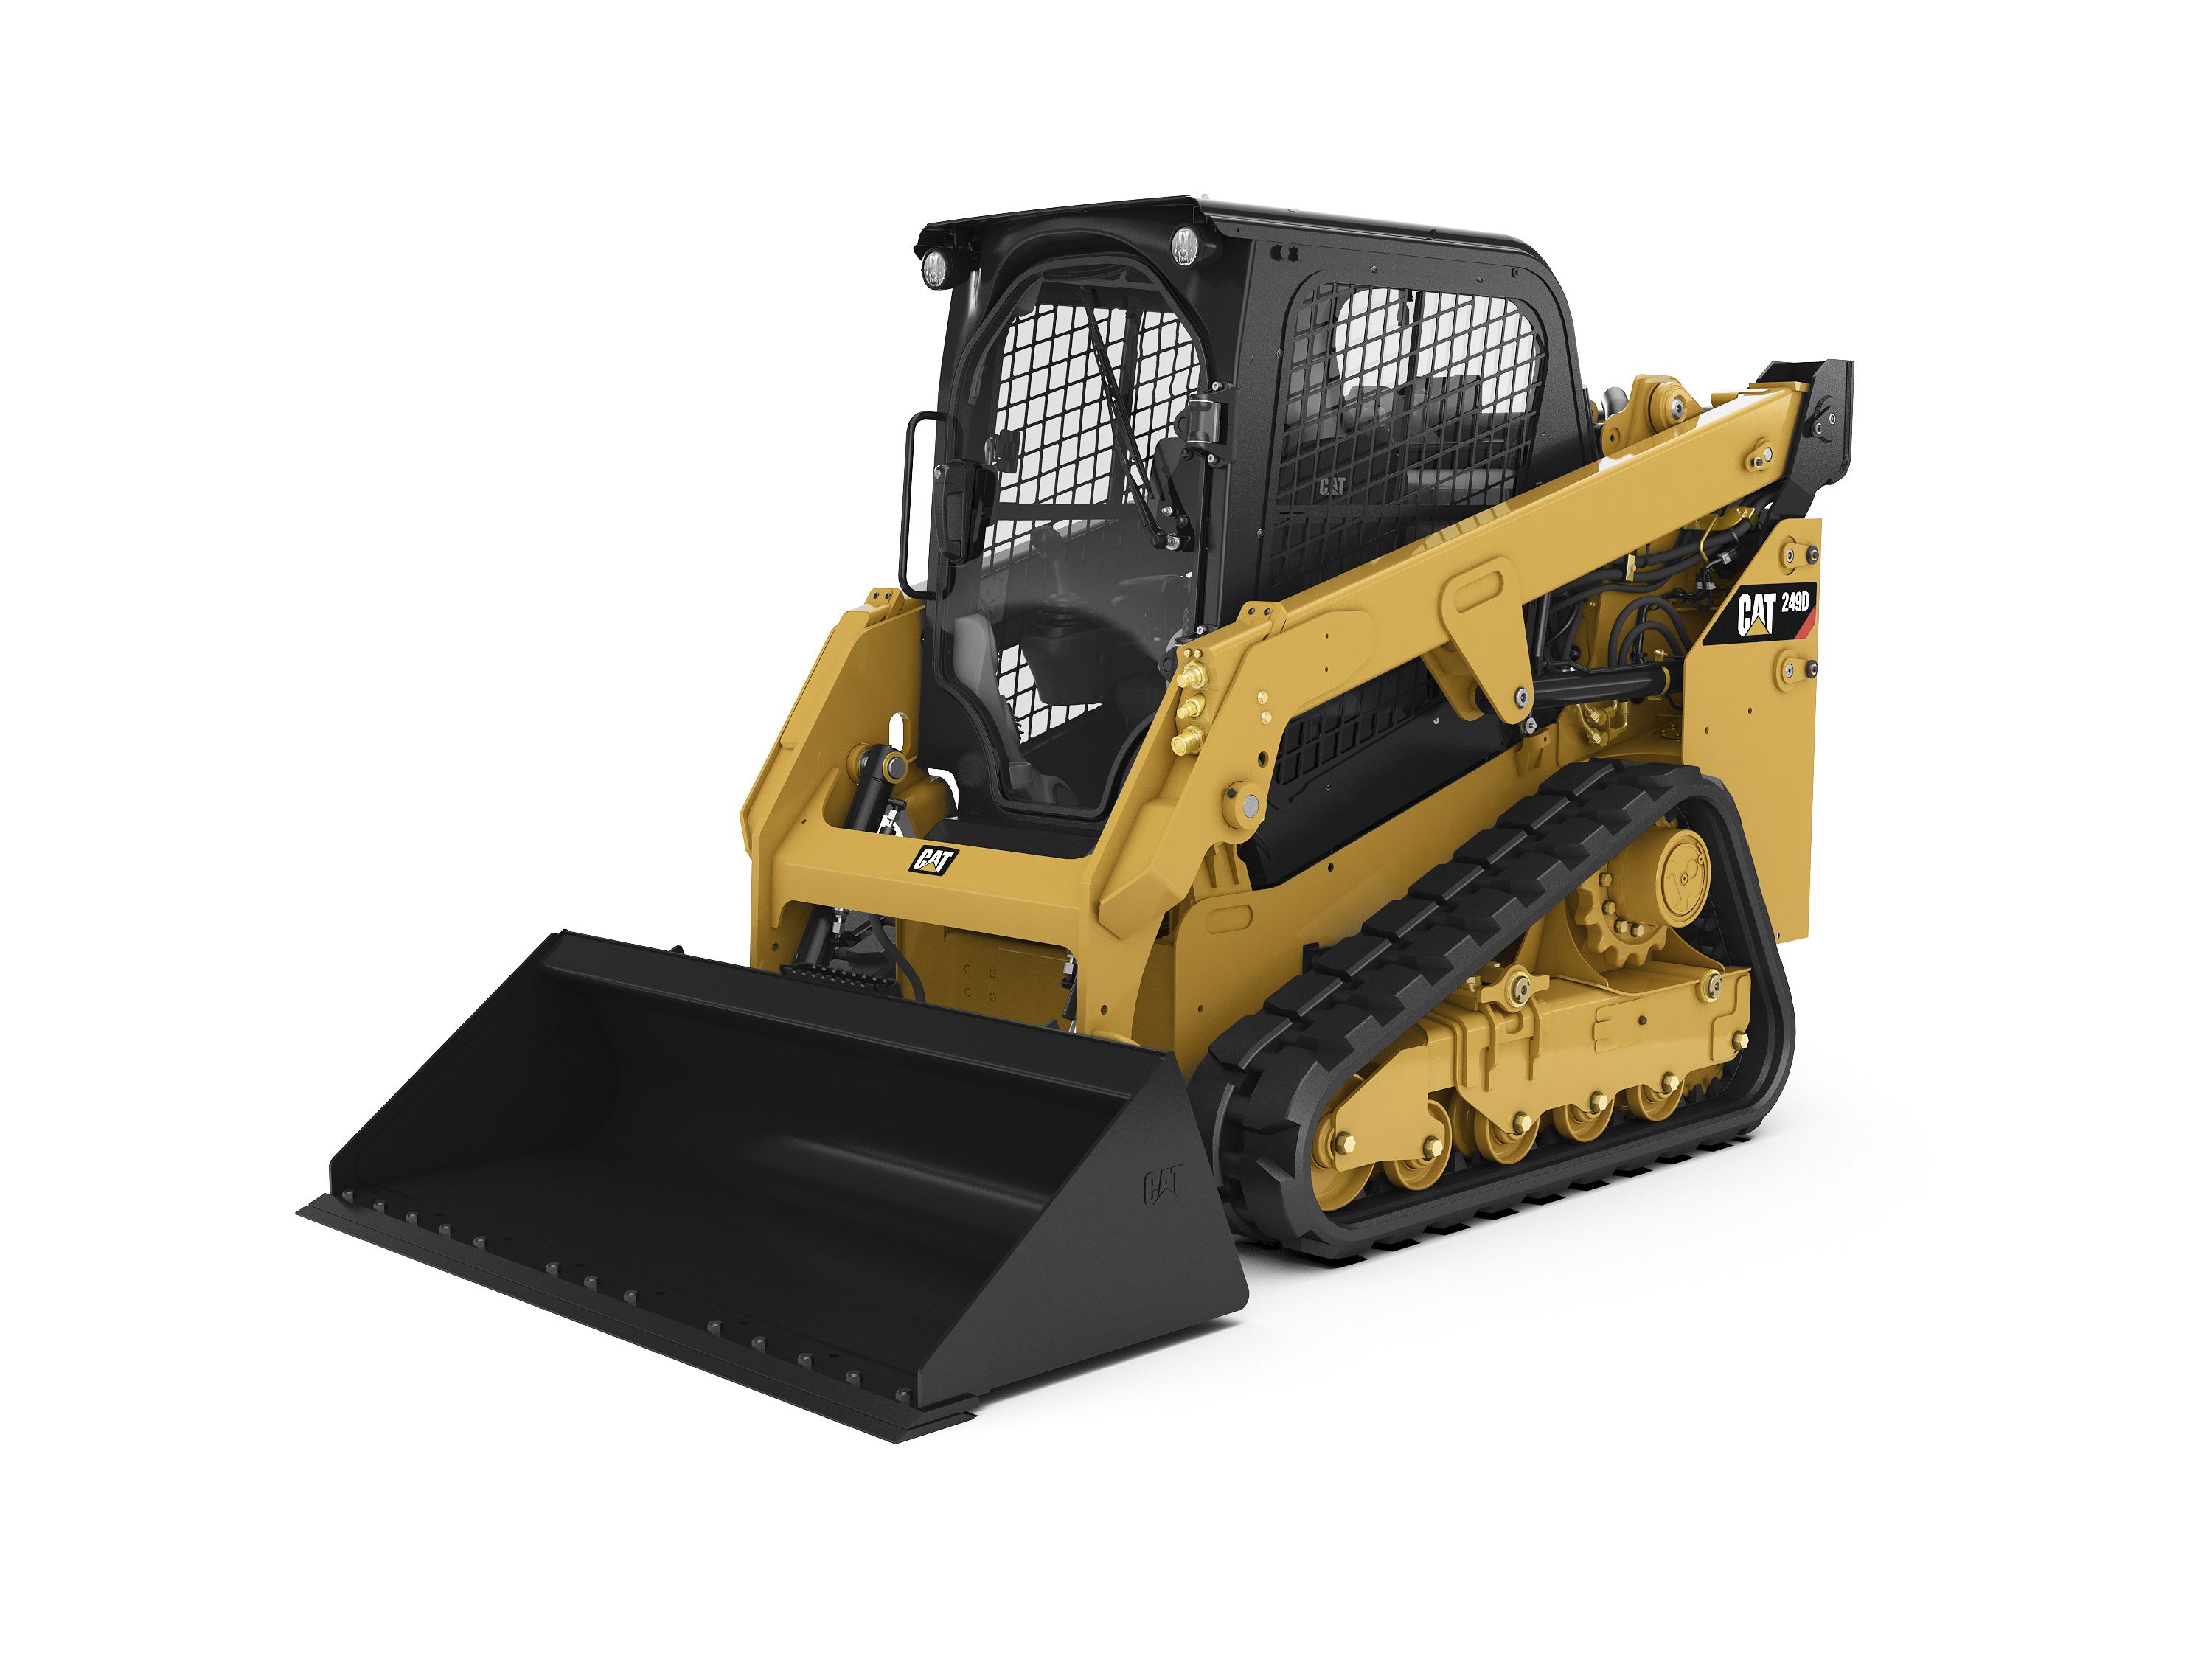 CAT compact track loader on white background